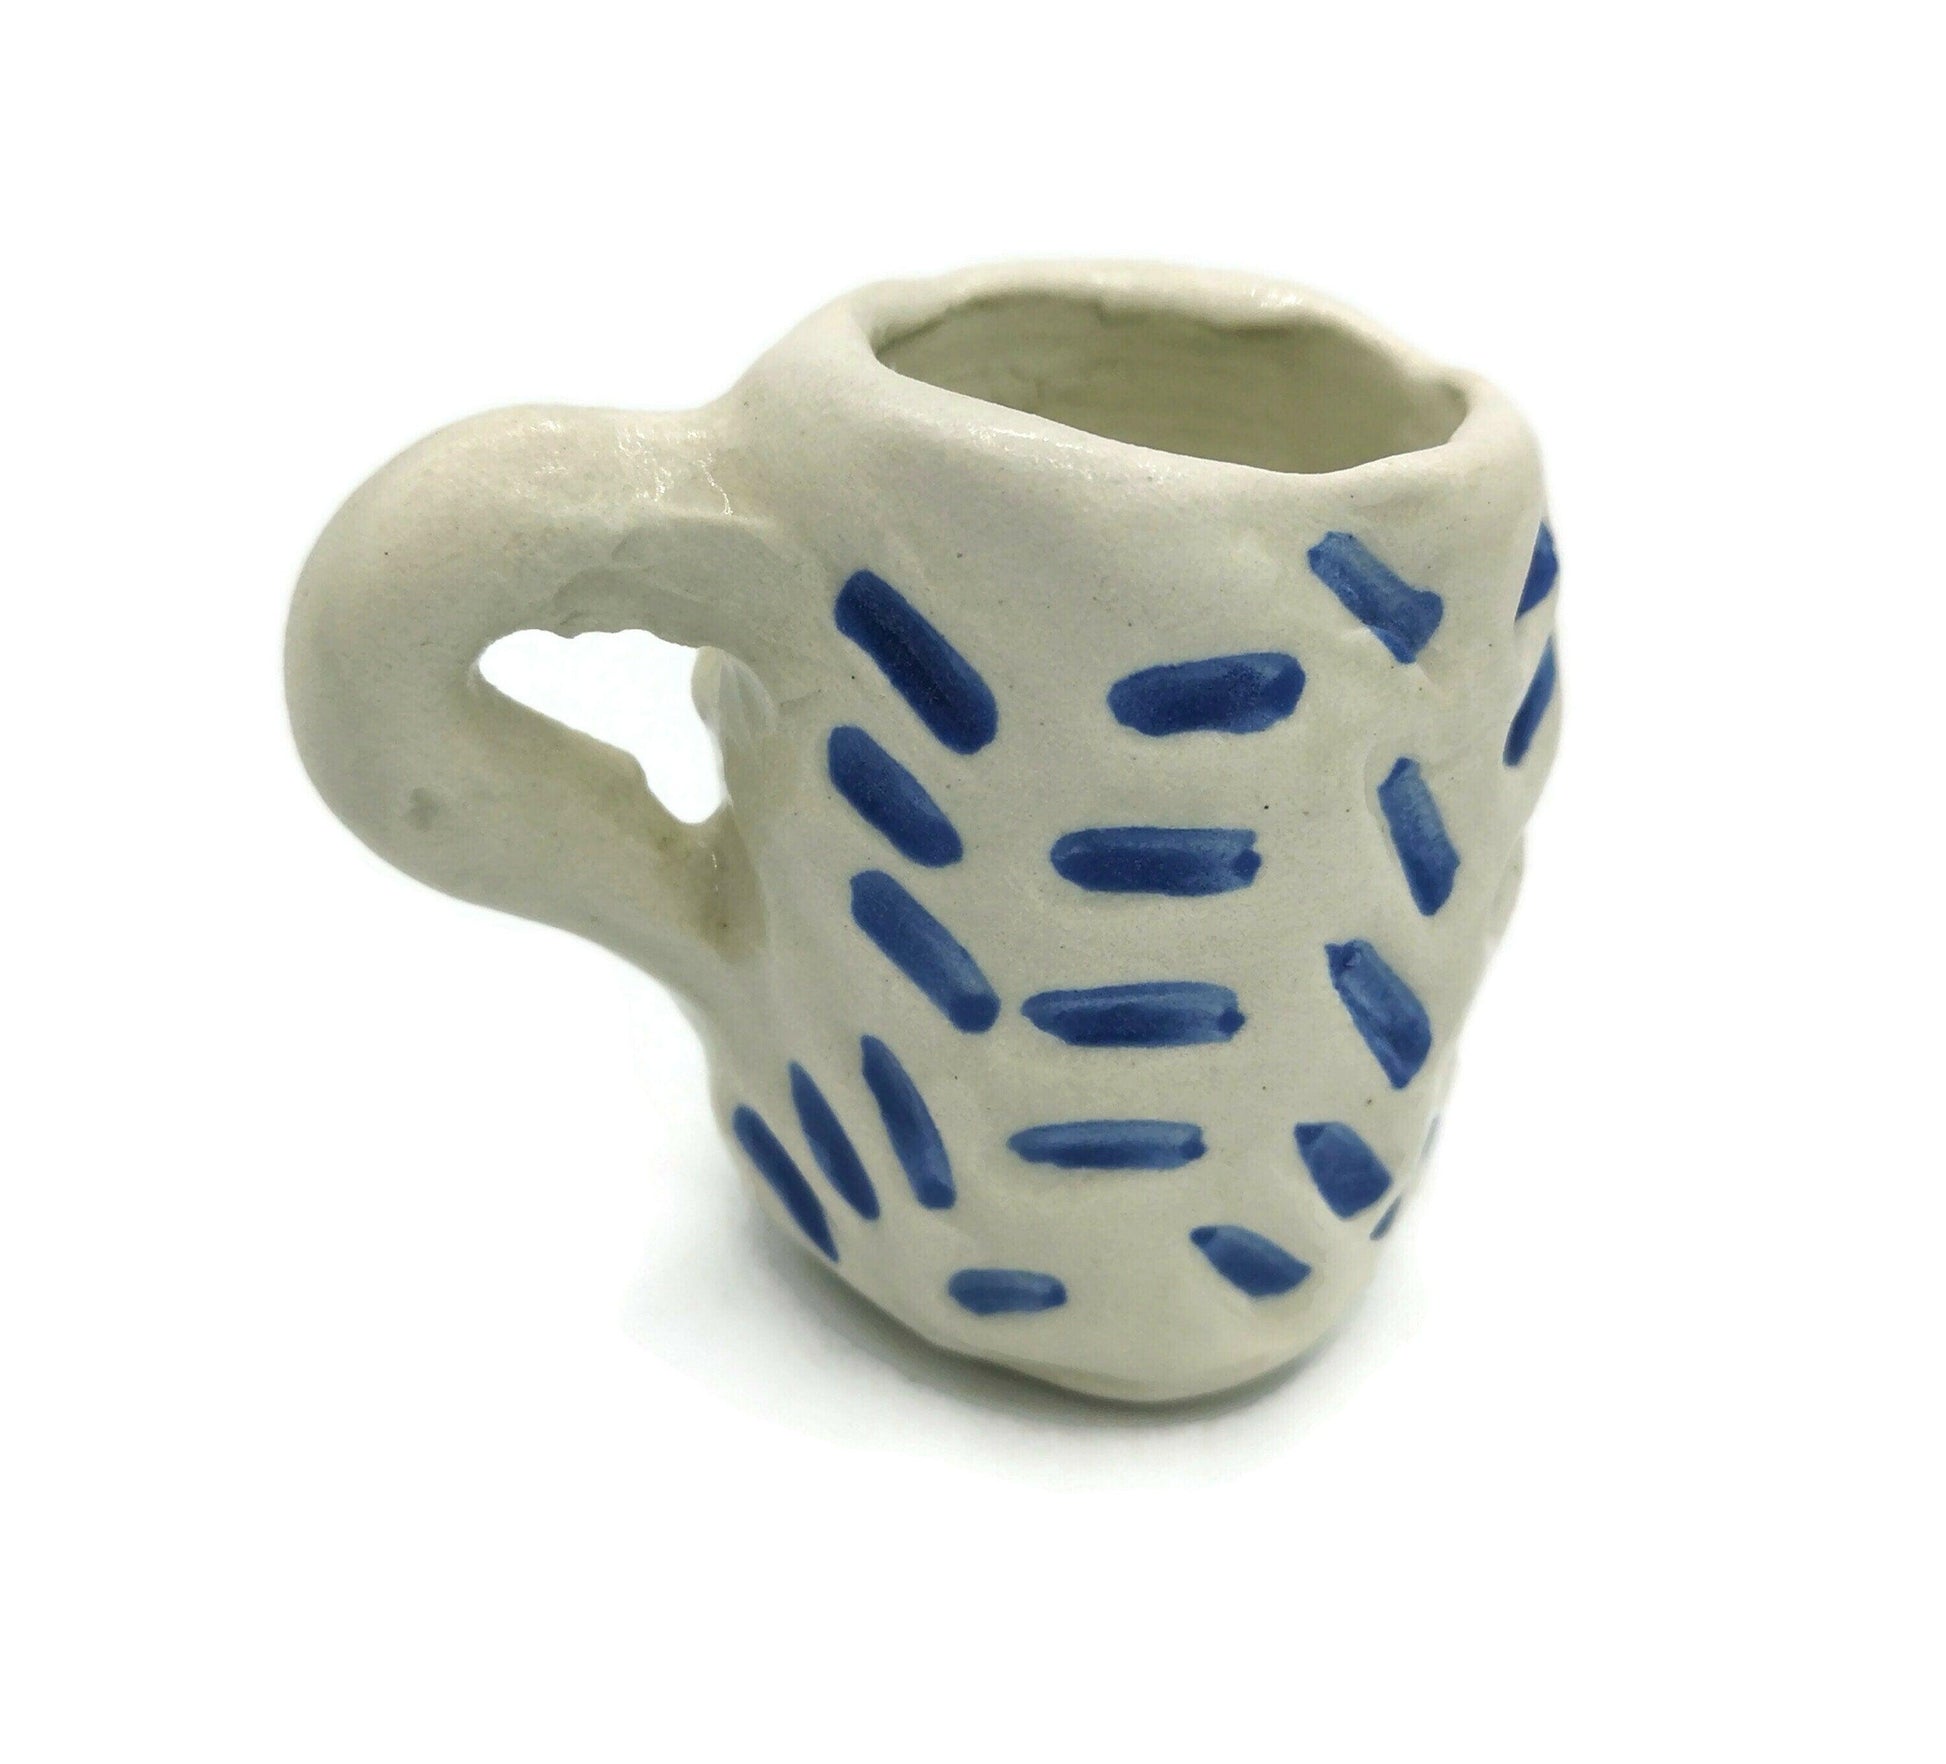 1Pc Handmade Ceramic Espresso Cup White and Blue, Funny Shot Glass Fathers Day Gift From Daughter, Mug Birthday Step Dad Gift Best Sellers - Ceramica Ana Rafael